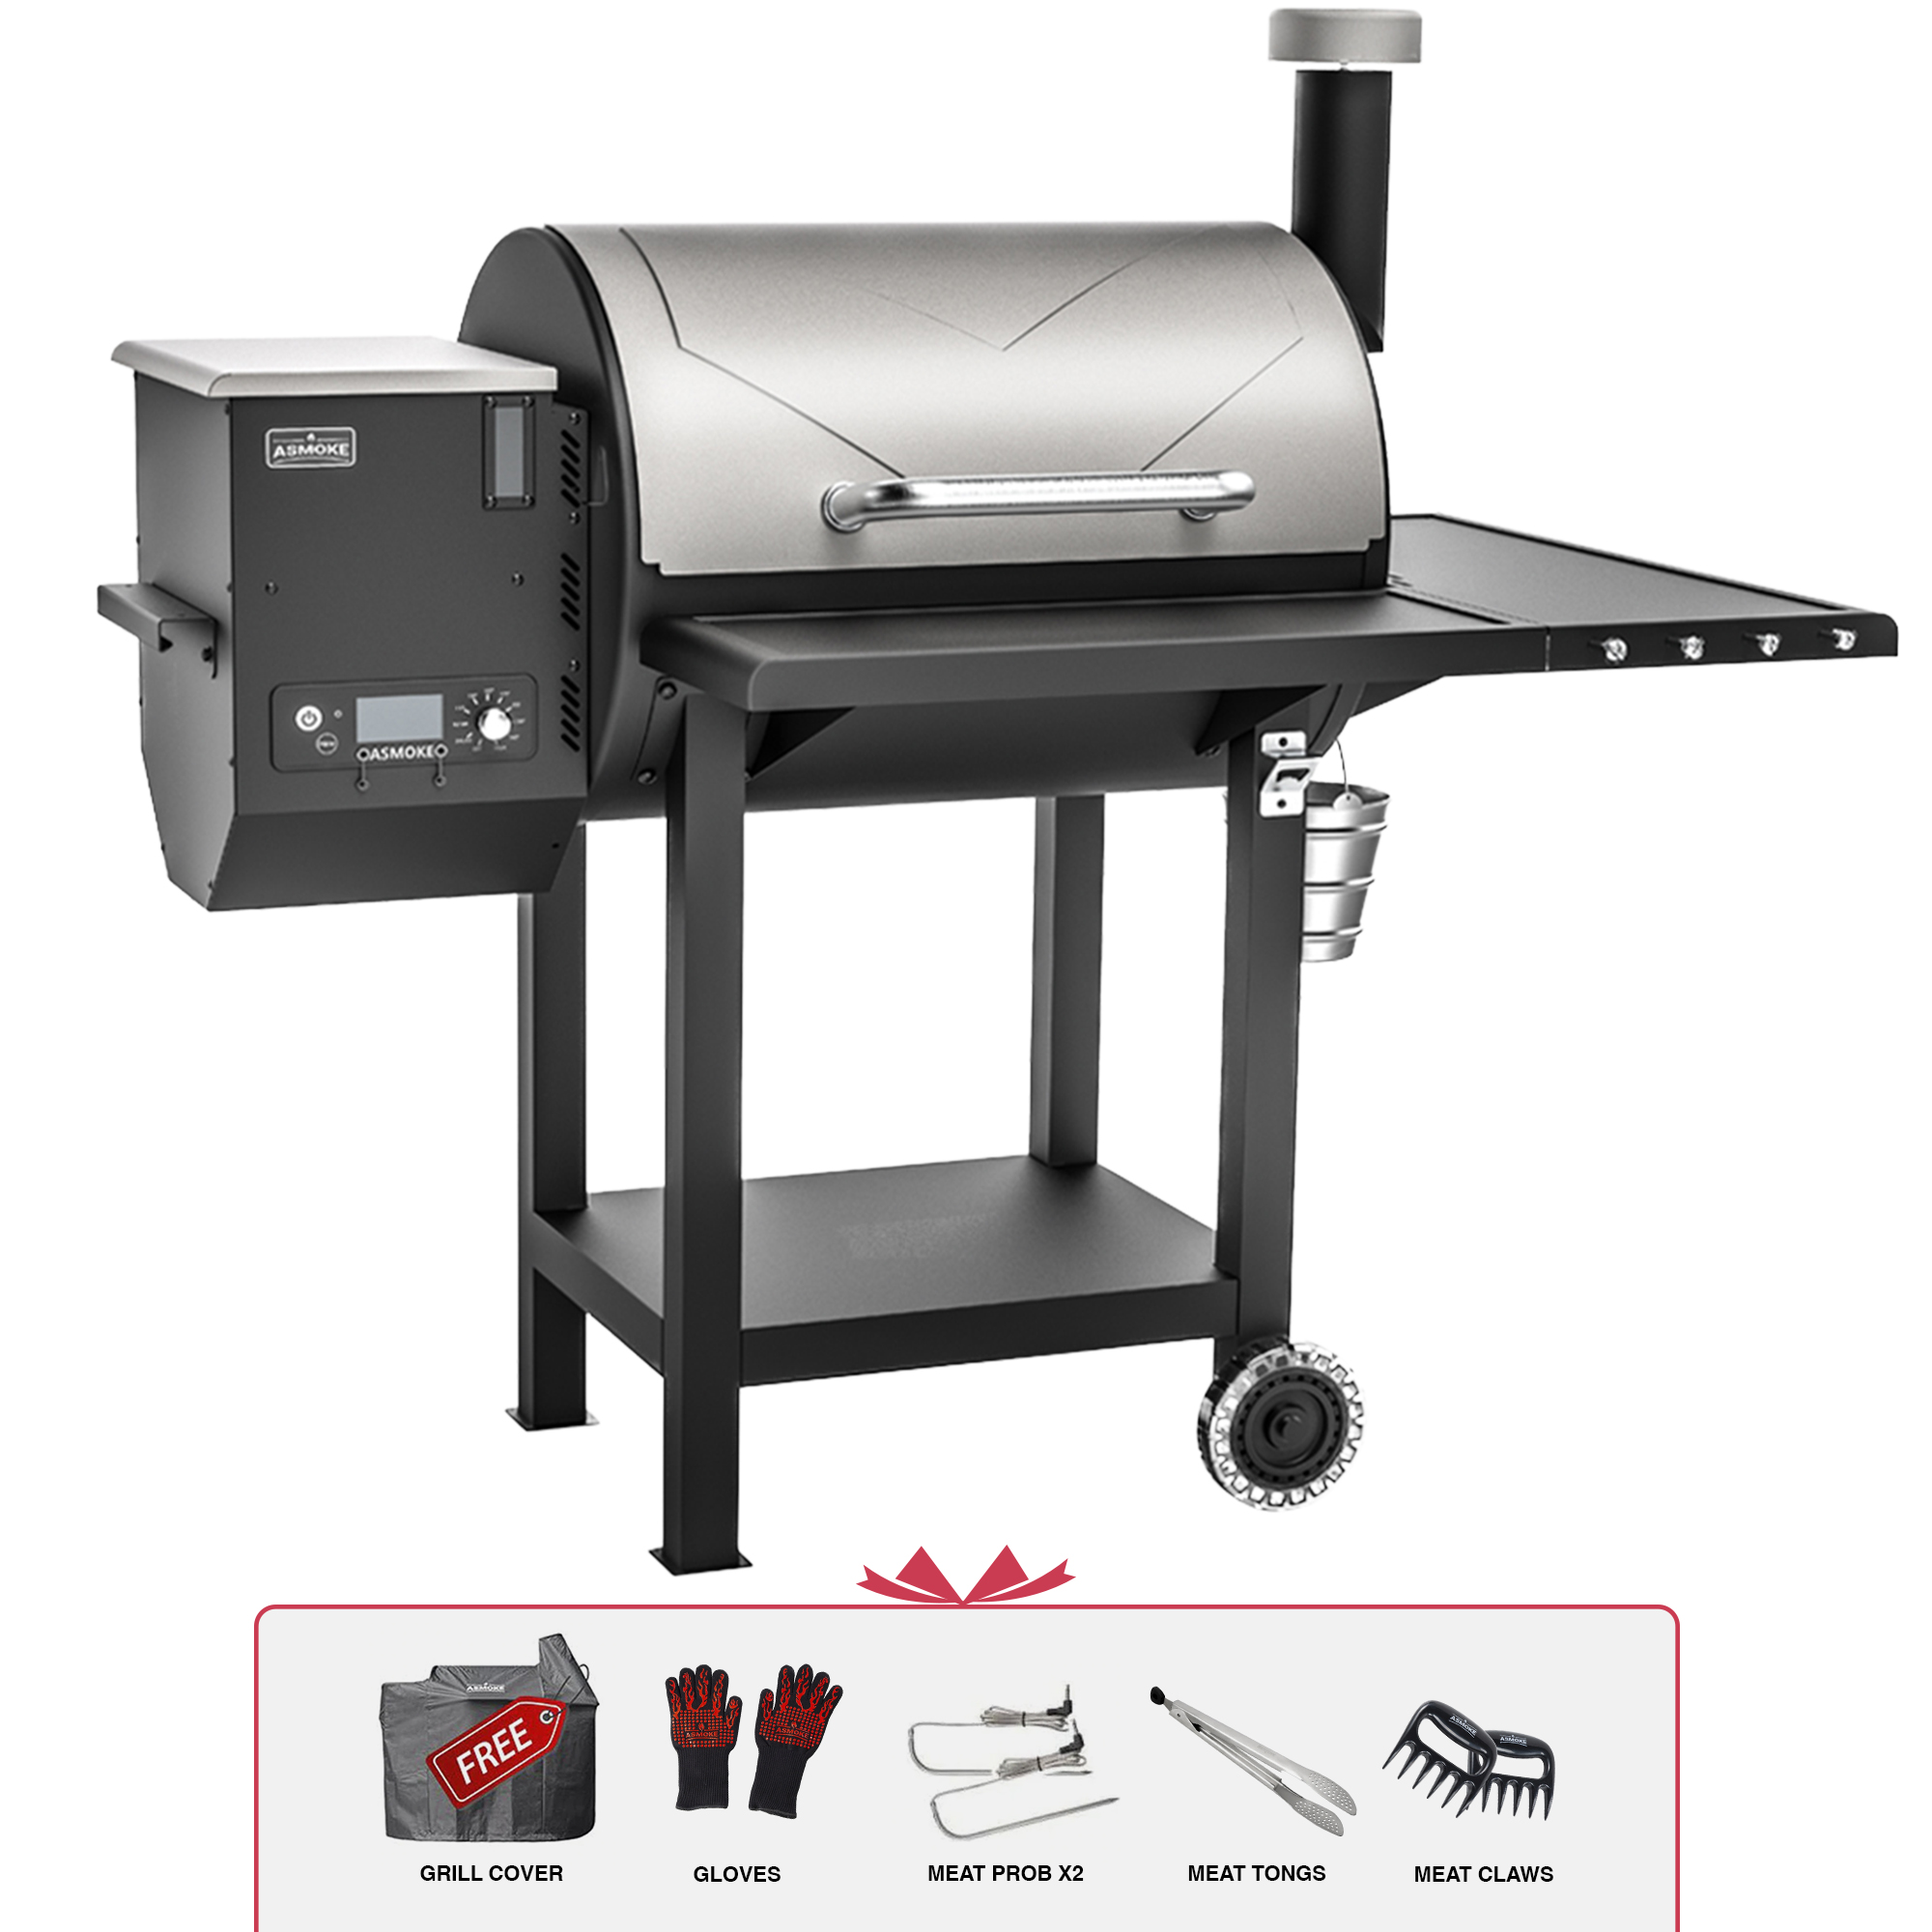 ASMOKE AS660N1 Wood Pellet Grill and Smoker 700 sq. in. with 2 Meat Probes, Chrome - image 1 of 13